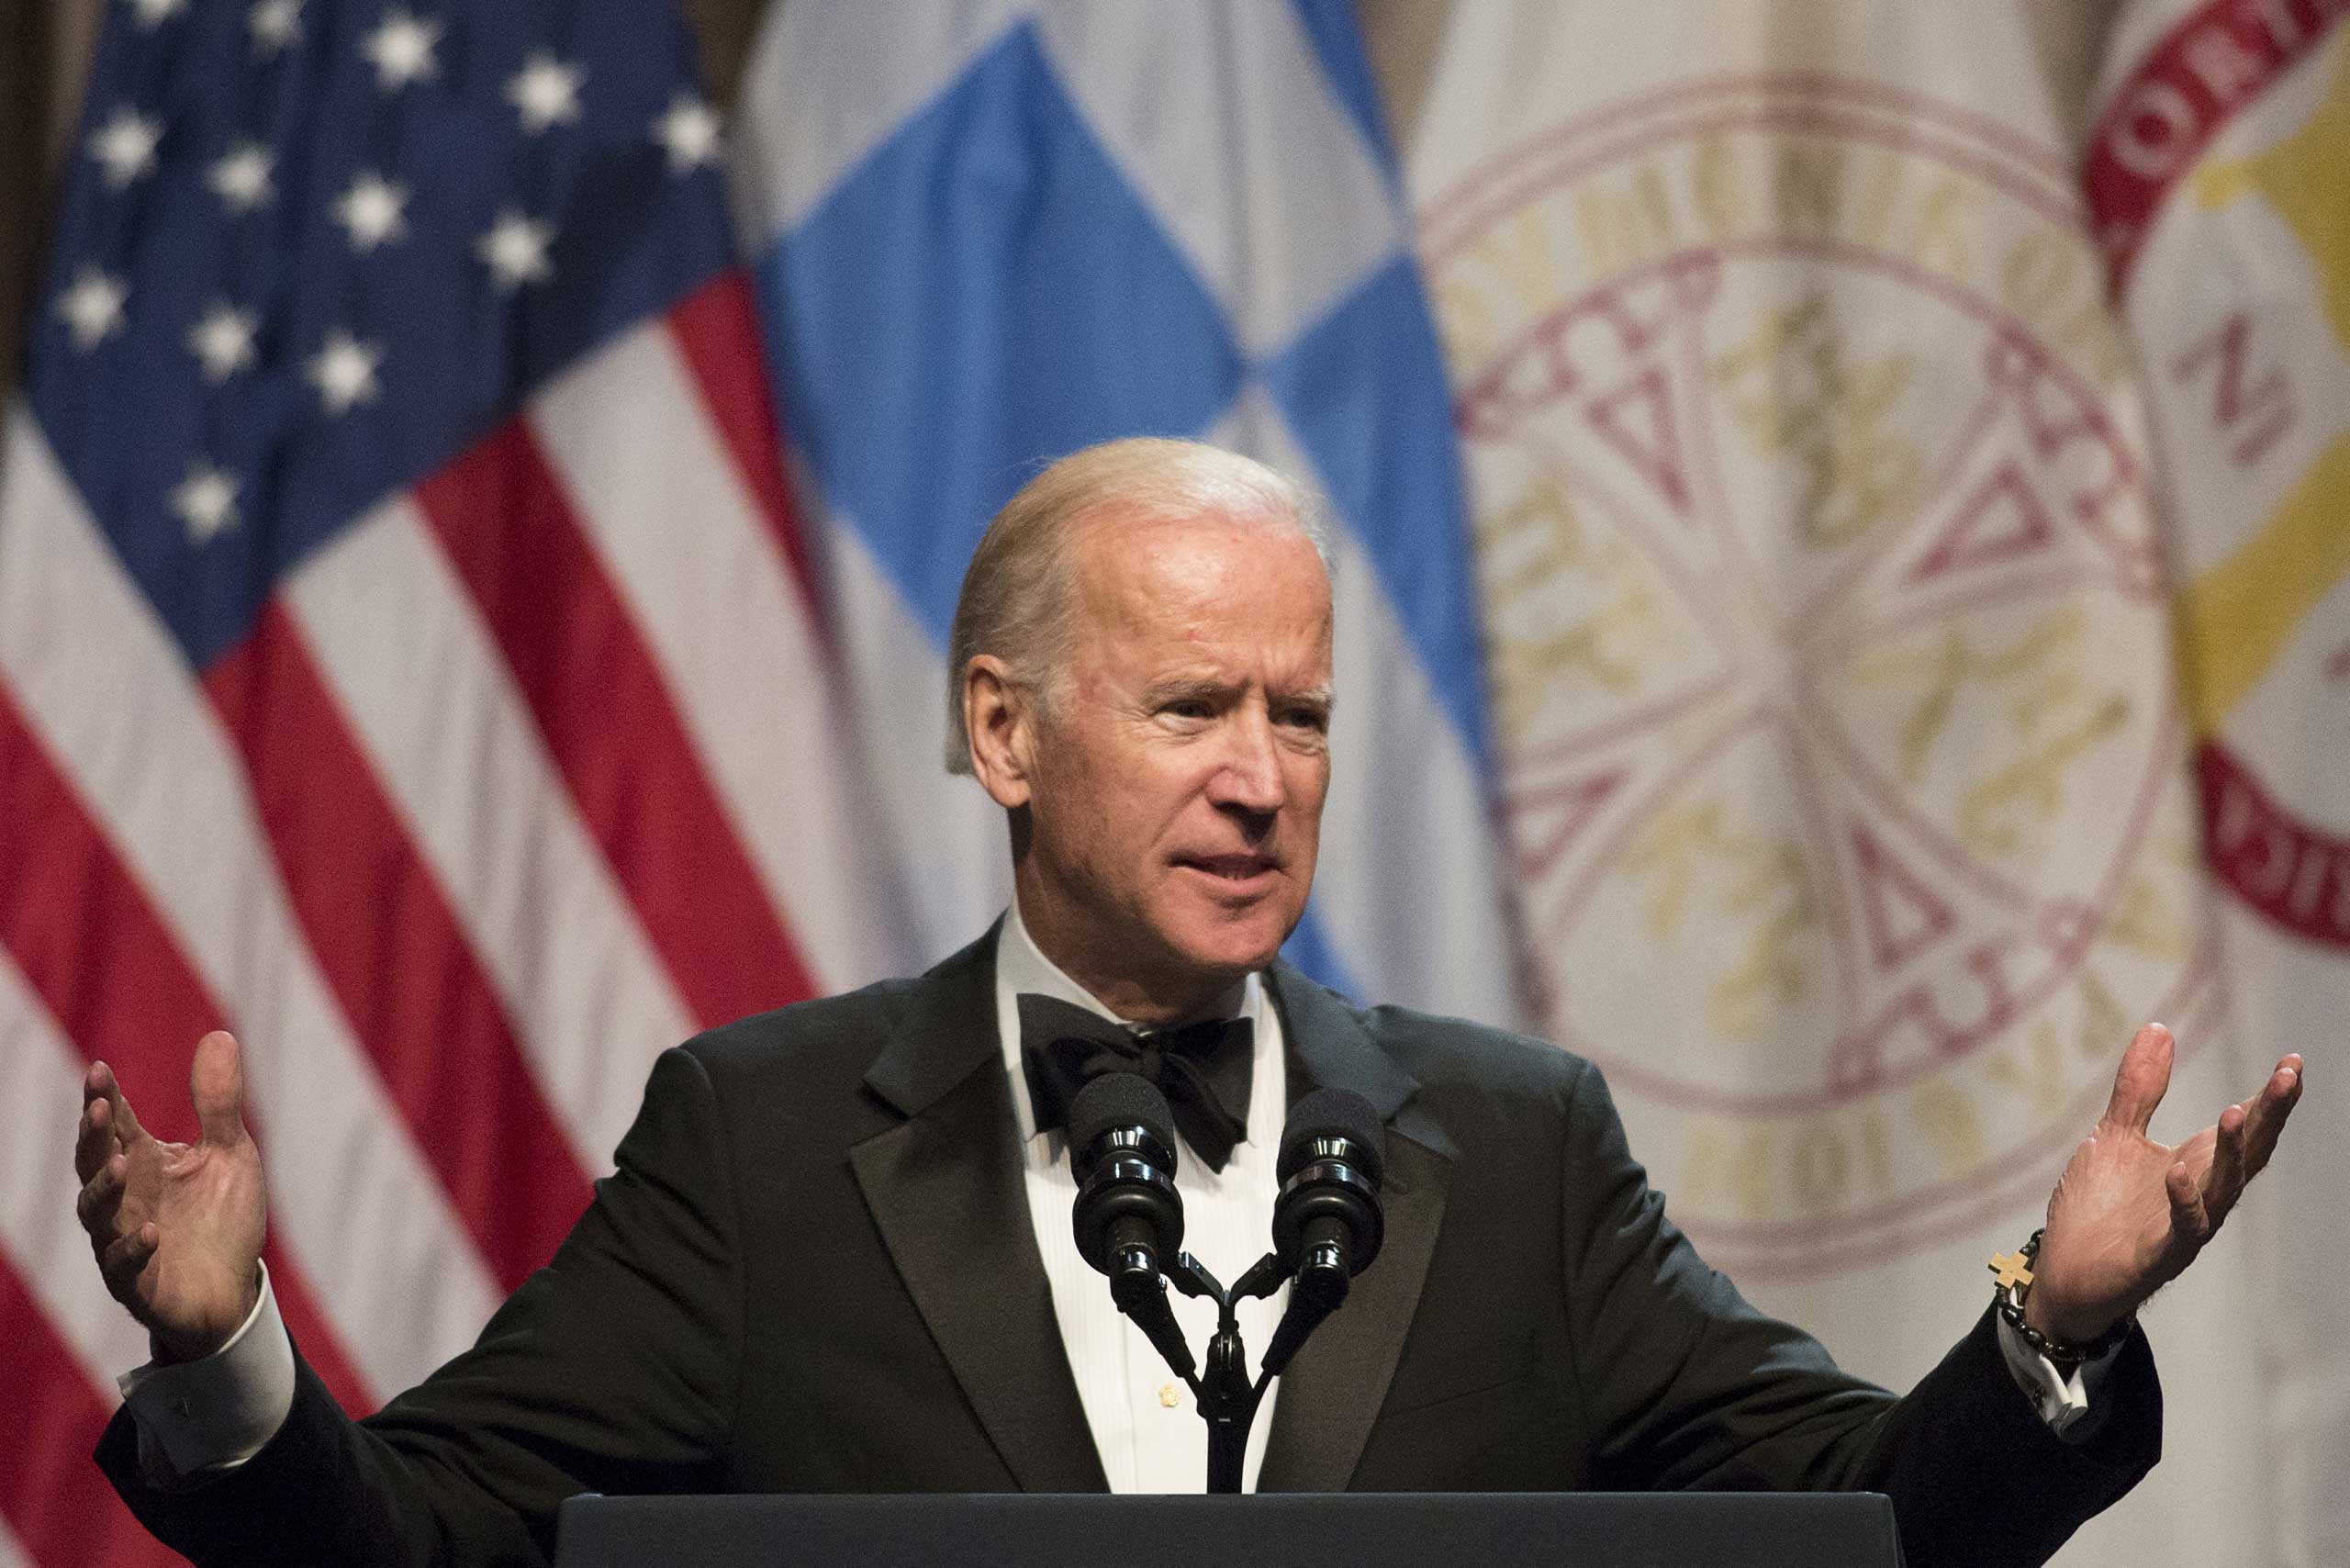 U.S. Vice President Joe Biden speaks after receiving the Athenagoras Human Rights Award from The Order of St. Andrew, Archons of the Ecumenical Patriarchate, in Manhattan